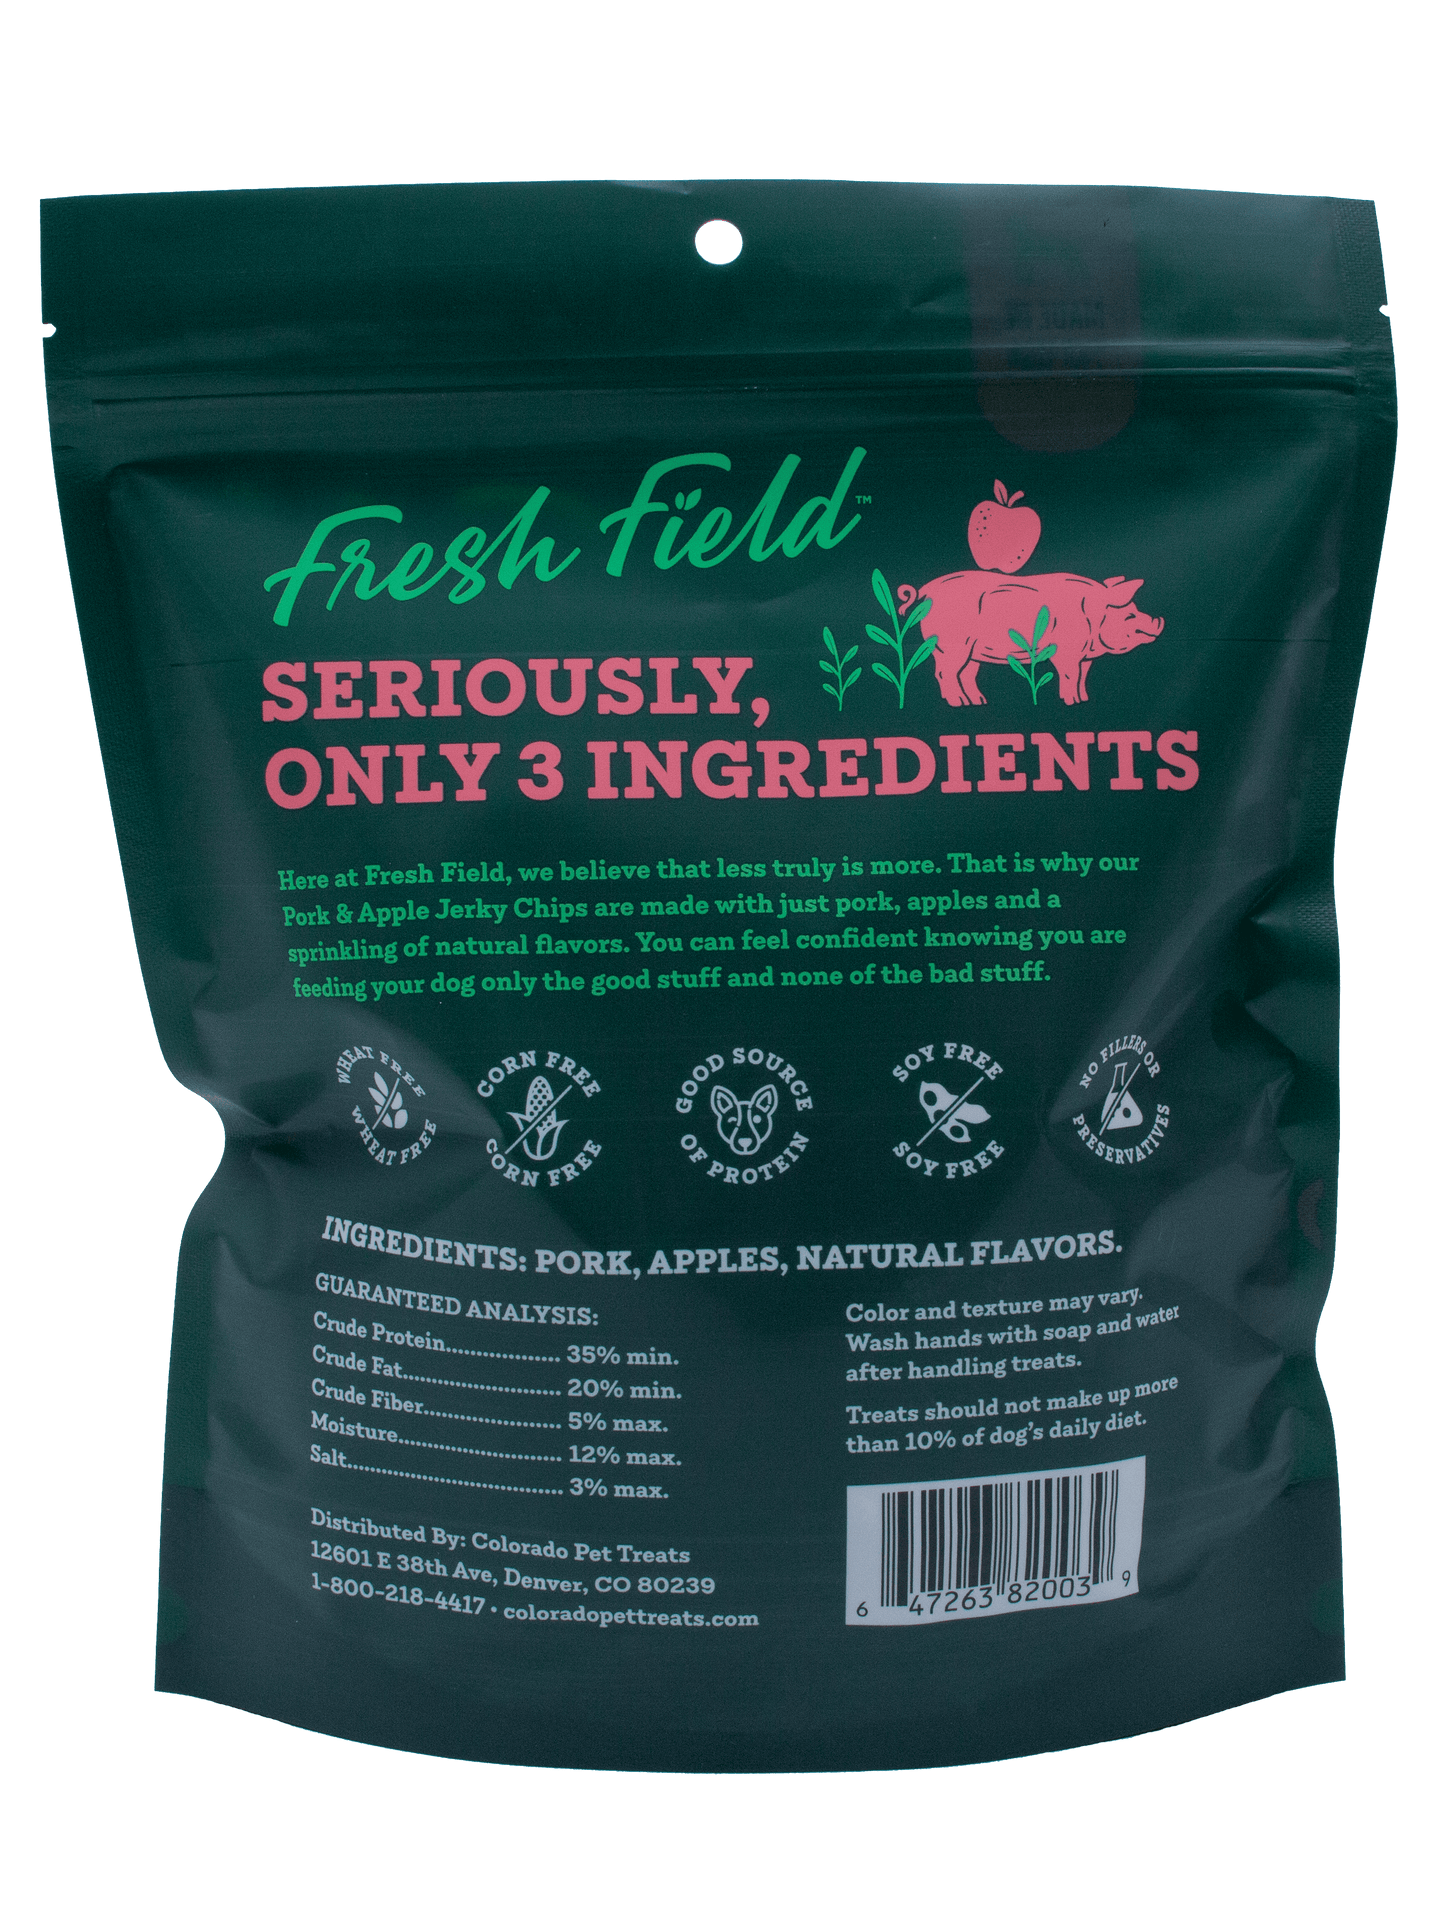 A photo of the bag back of the 14 oz Pork and Apple Jerky Chips Dog Treats And toy bundle with no toy. This bundle is from Fresh Fields by Colorado Pet Treats and P.L.A.Y.